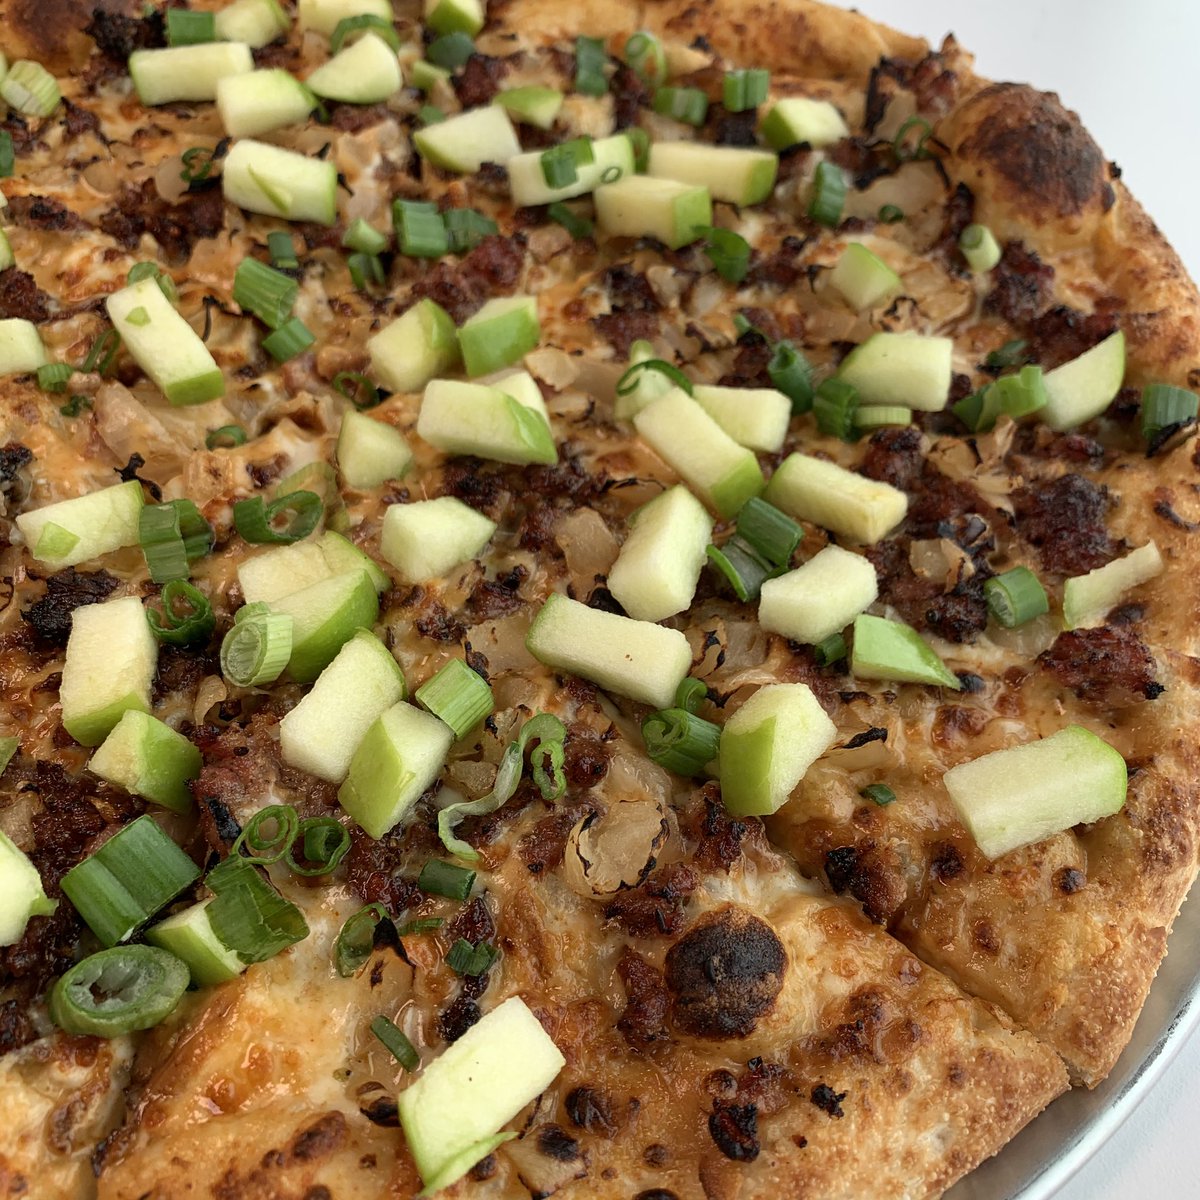 The OTTO Pizza! Smoked Cream Sauce, Mozzarella - Monterey Jack - Smoked Gouda Cheese Blend, OTTO Sausage, Caramelized Onion, Granny Smith Apple, Green Onion. $1 from each OTTO pizza sold goes to our upcoming annual diaper drive supporting the @TerraCentre - more details SOON!